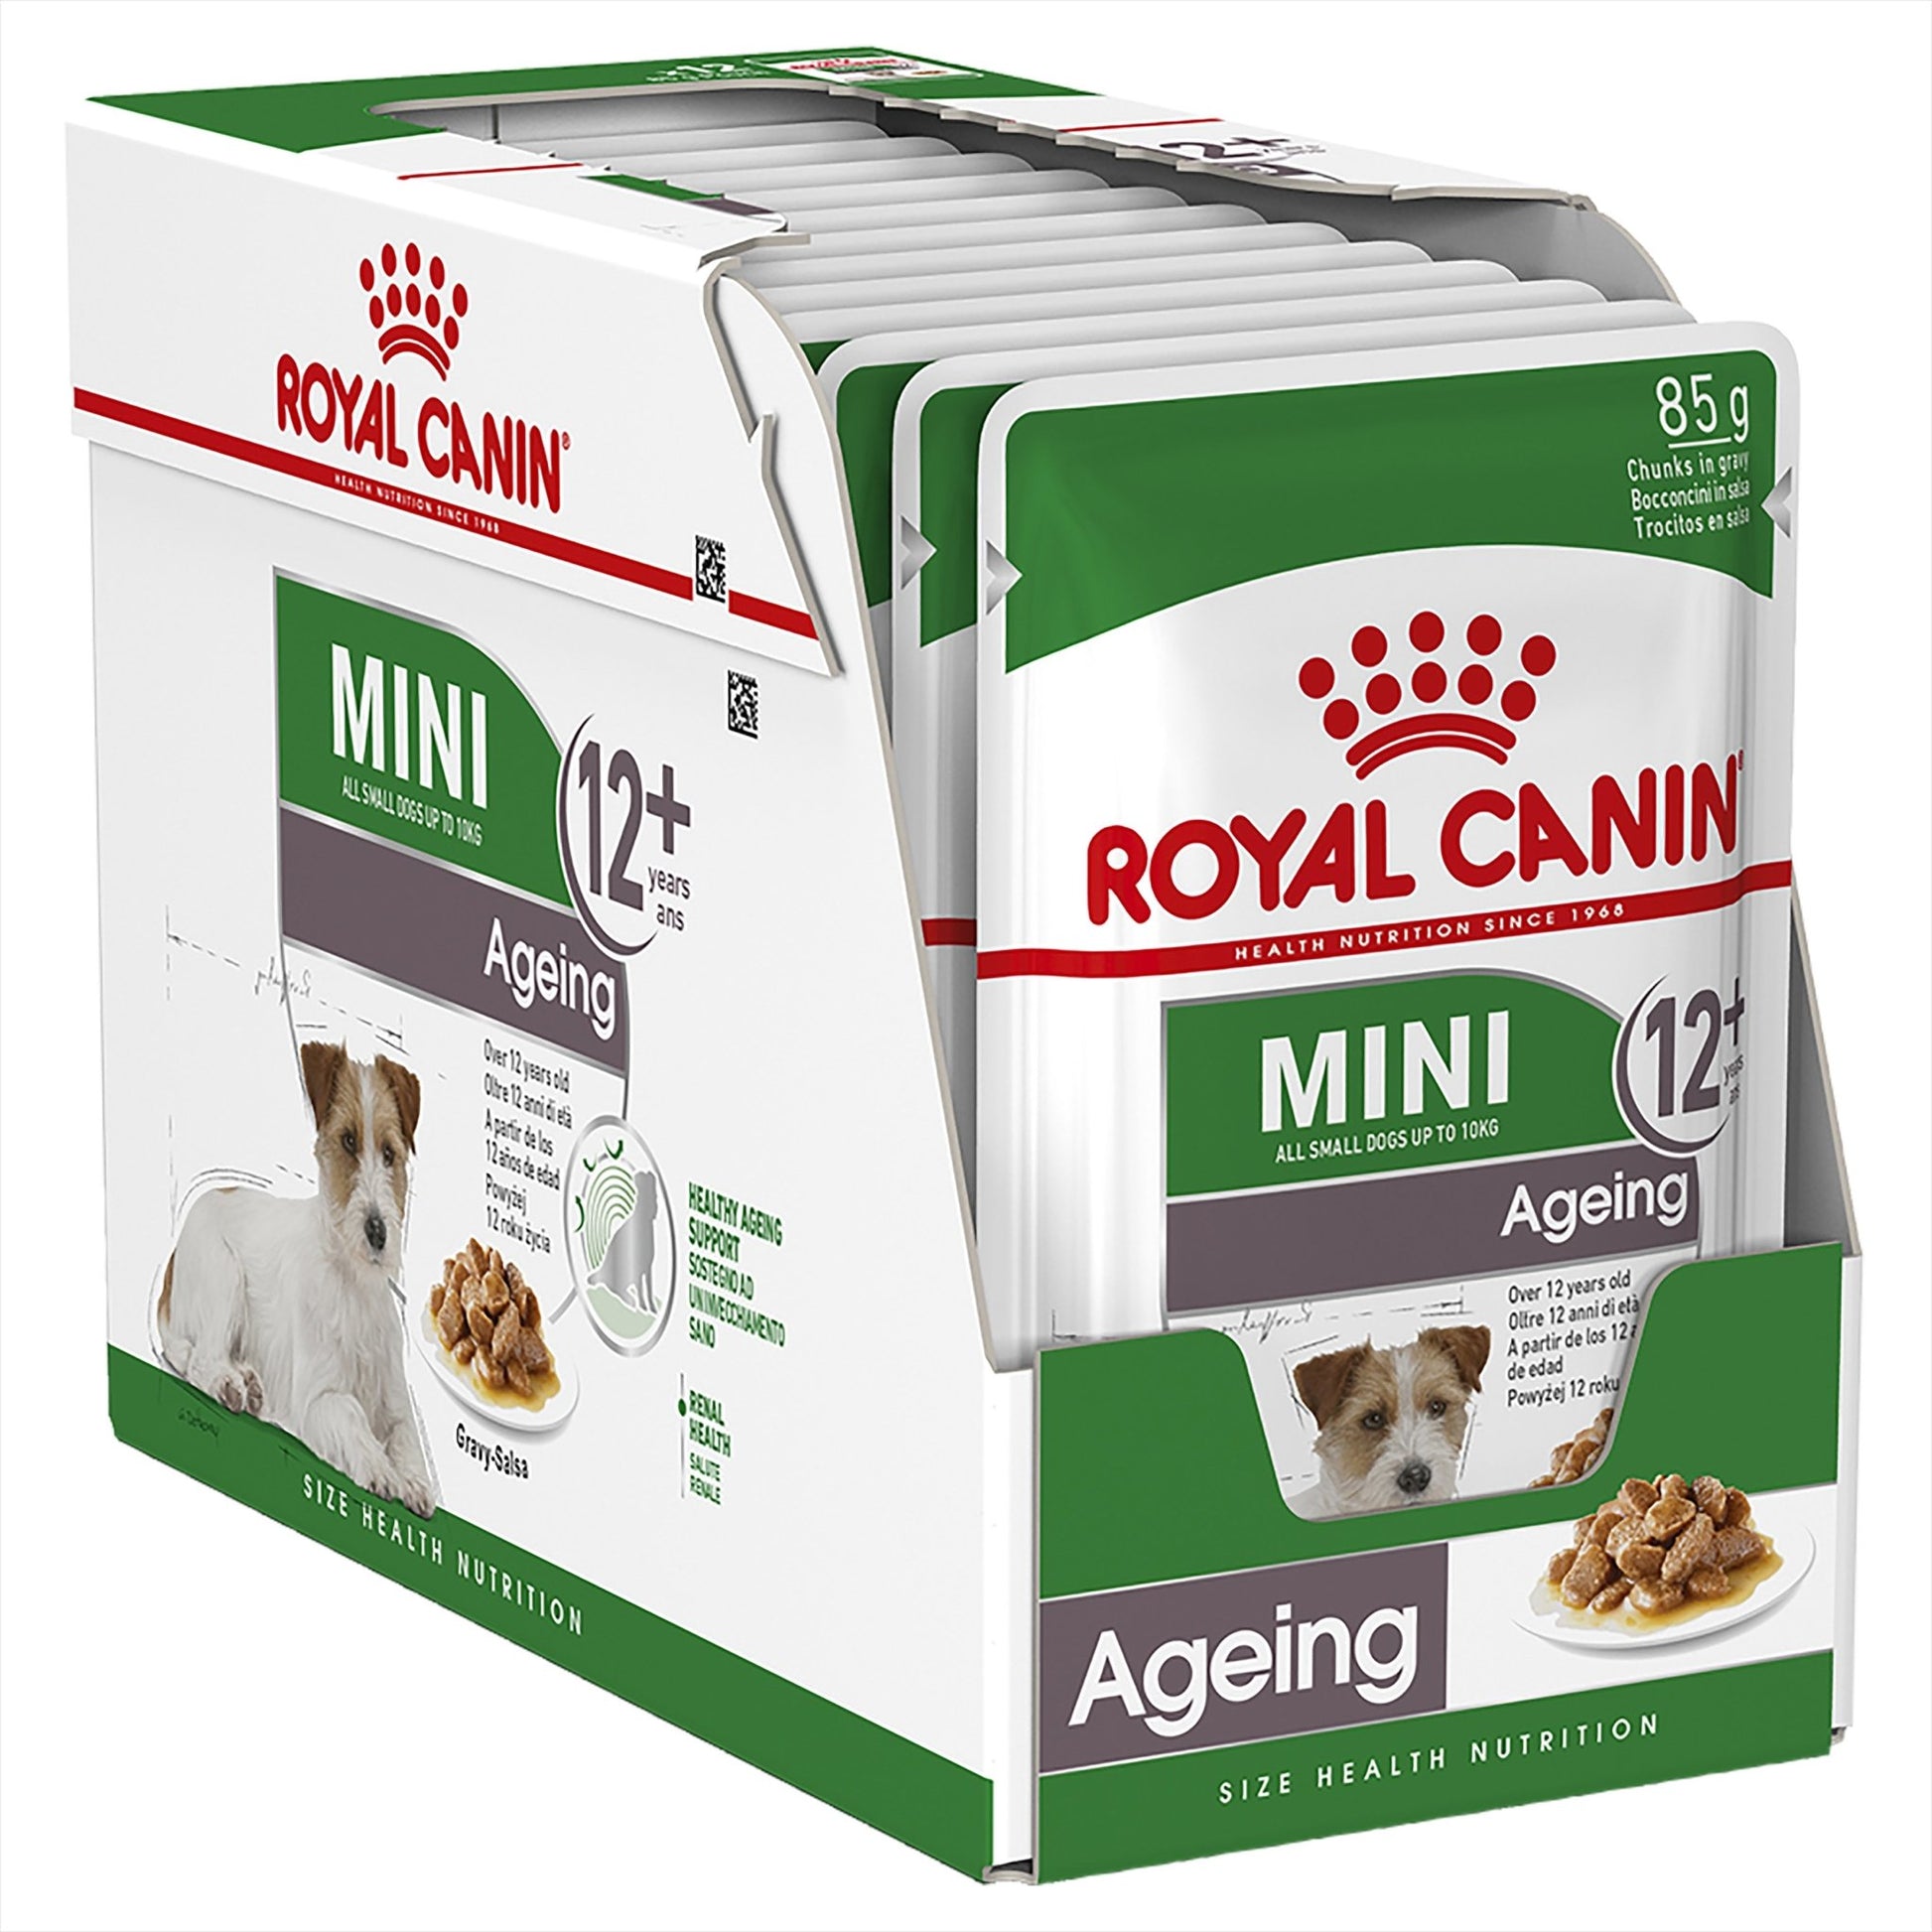 Royal Canin Dog Wet Pouch Mini Ageing 12+ 85g - Woonona Petfood & Produce